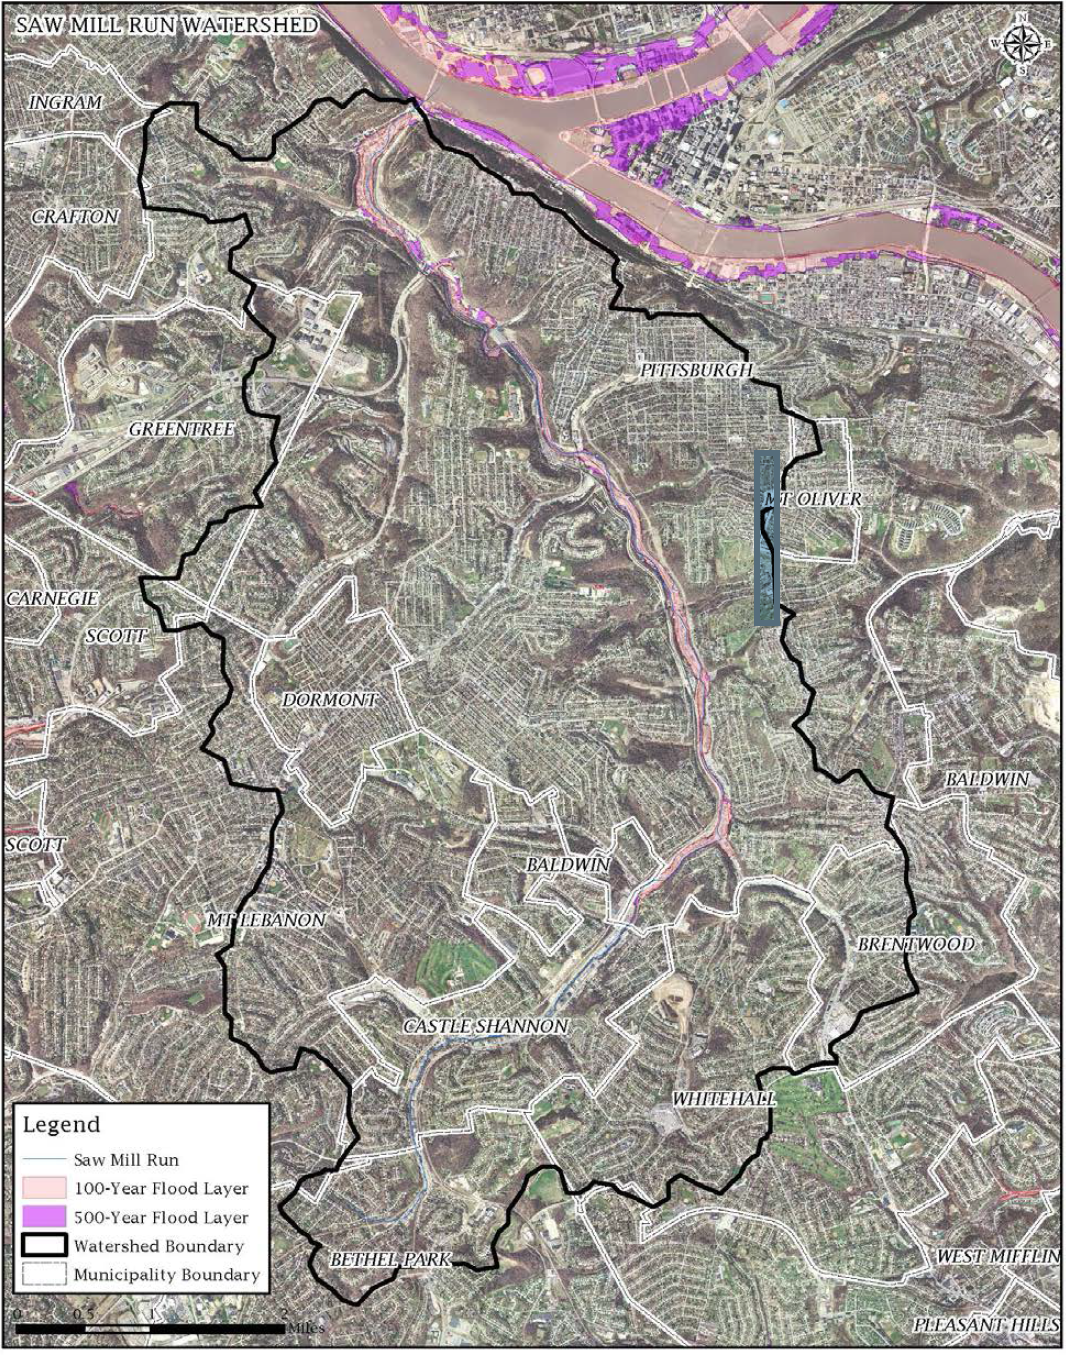 A map of the Saw Mill Run Watershed from the U.S. Army Corps of Engineers.